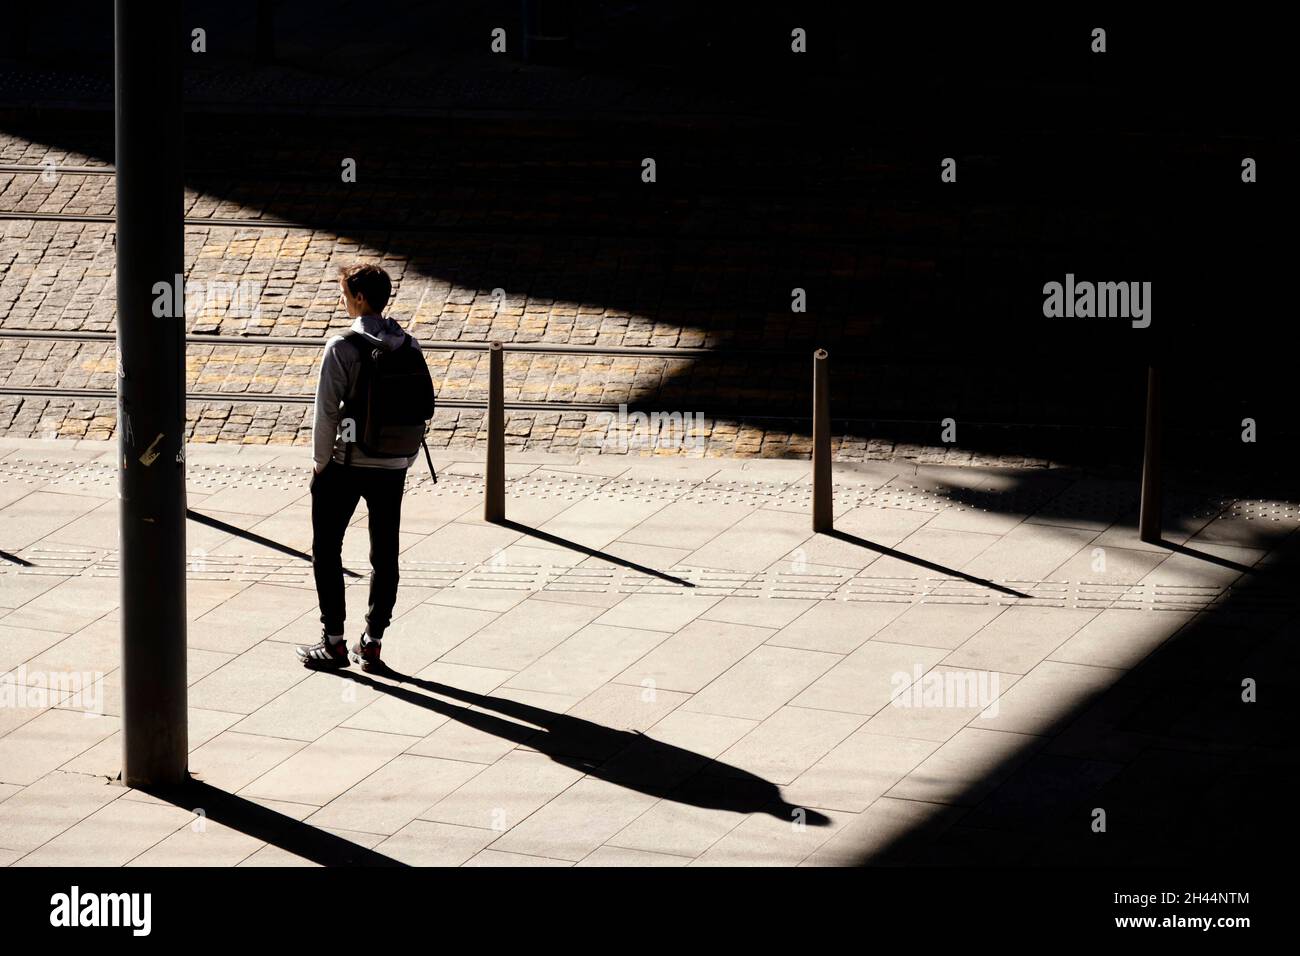 Belgrade, Serbia - October 26, 2020: One teenage boy standing alone waiting for a tram on bus stop in sunlight, high angle view from behind, with shad Stock Photo